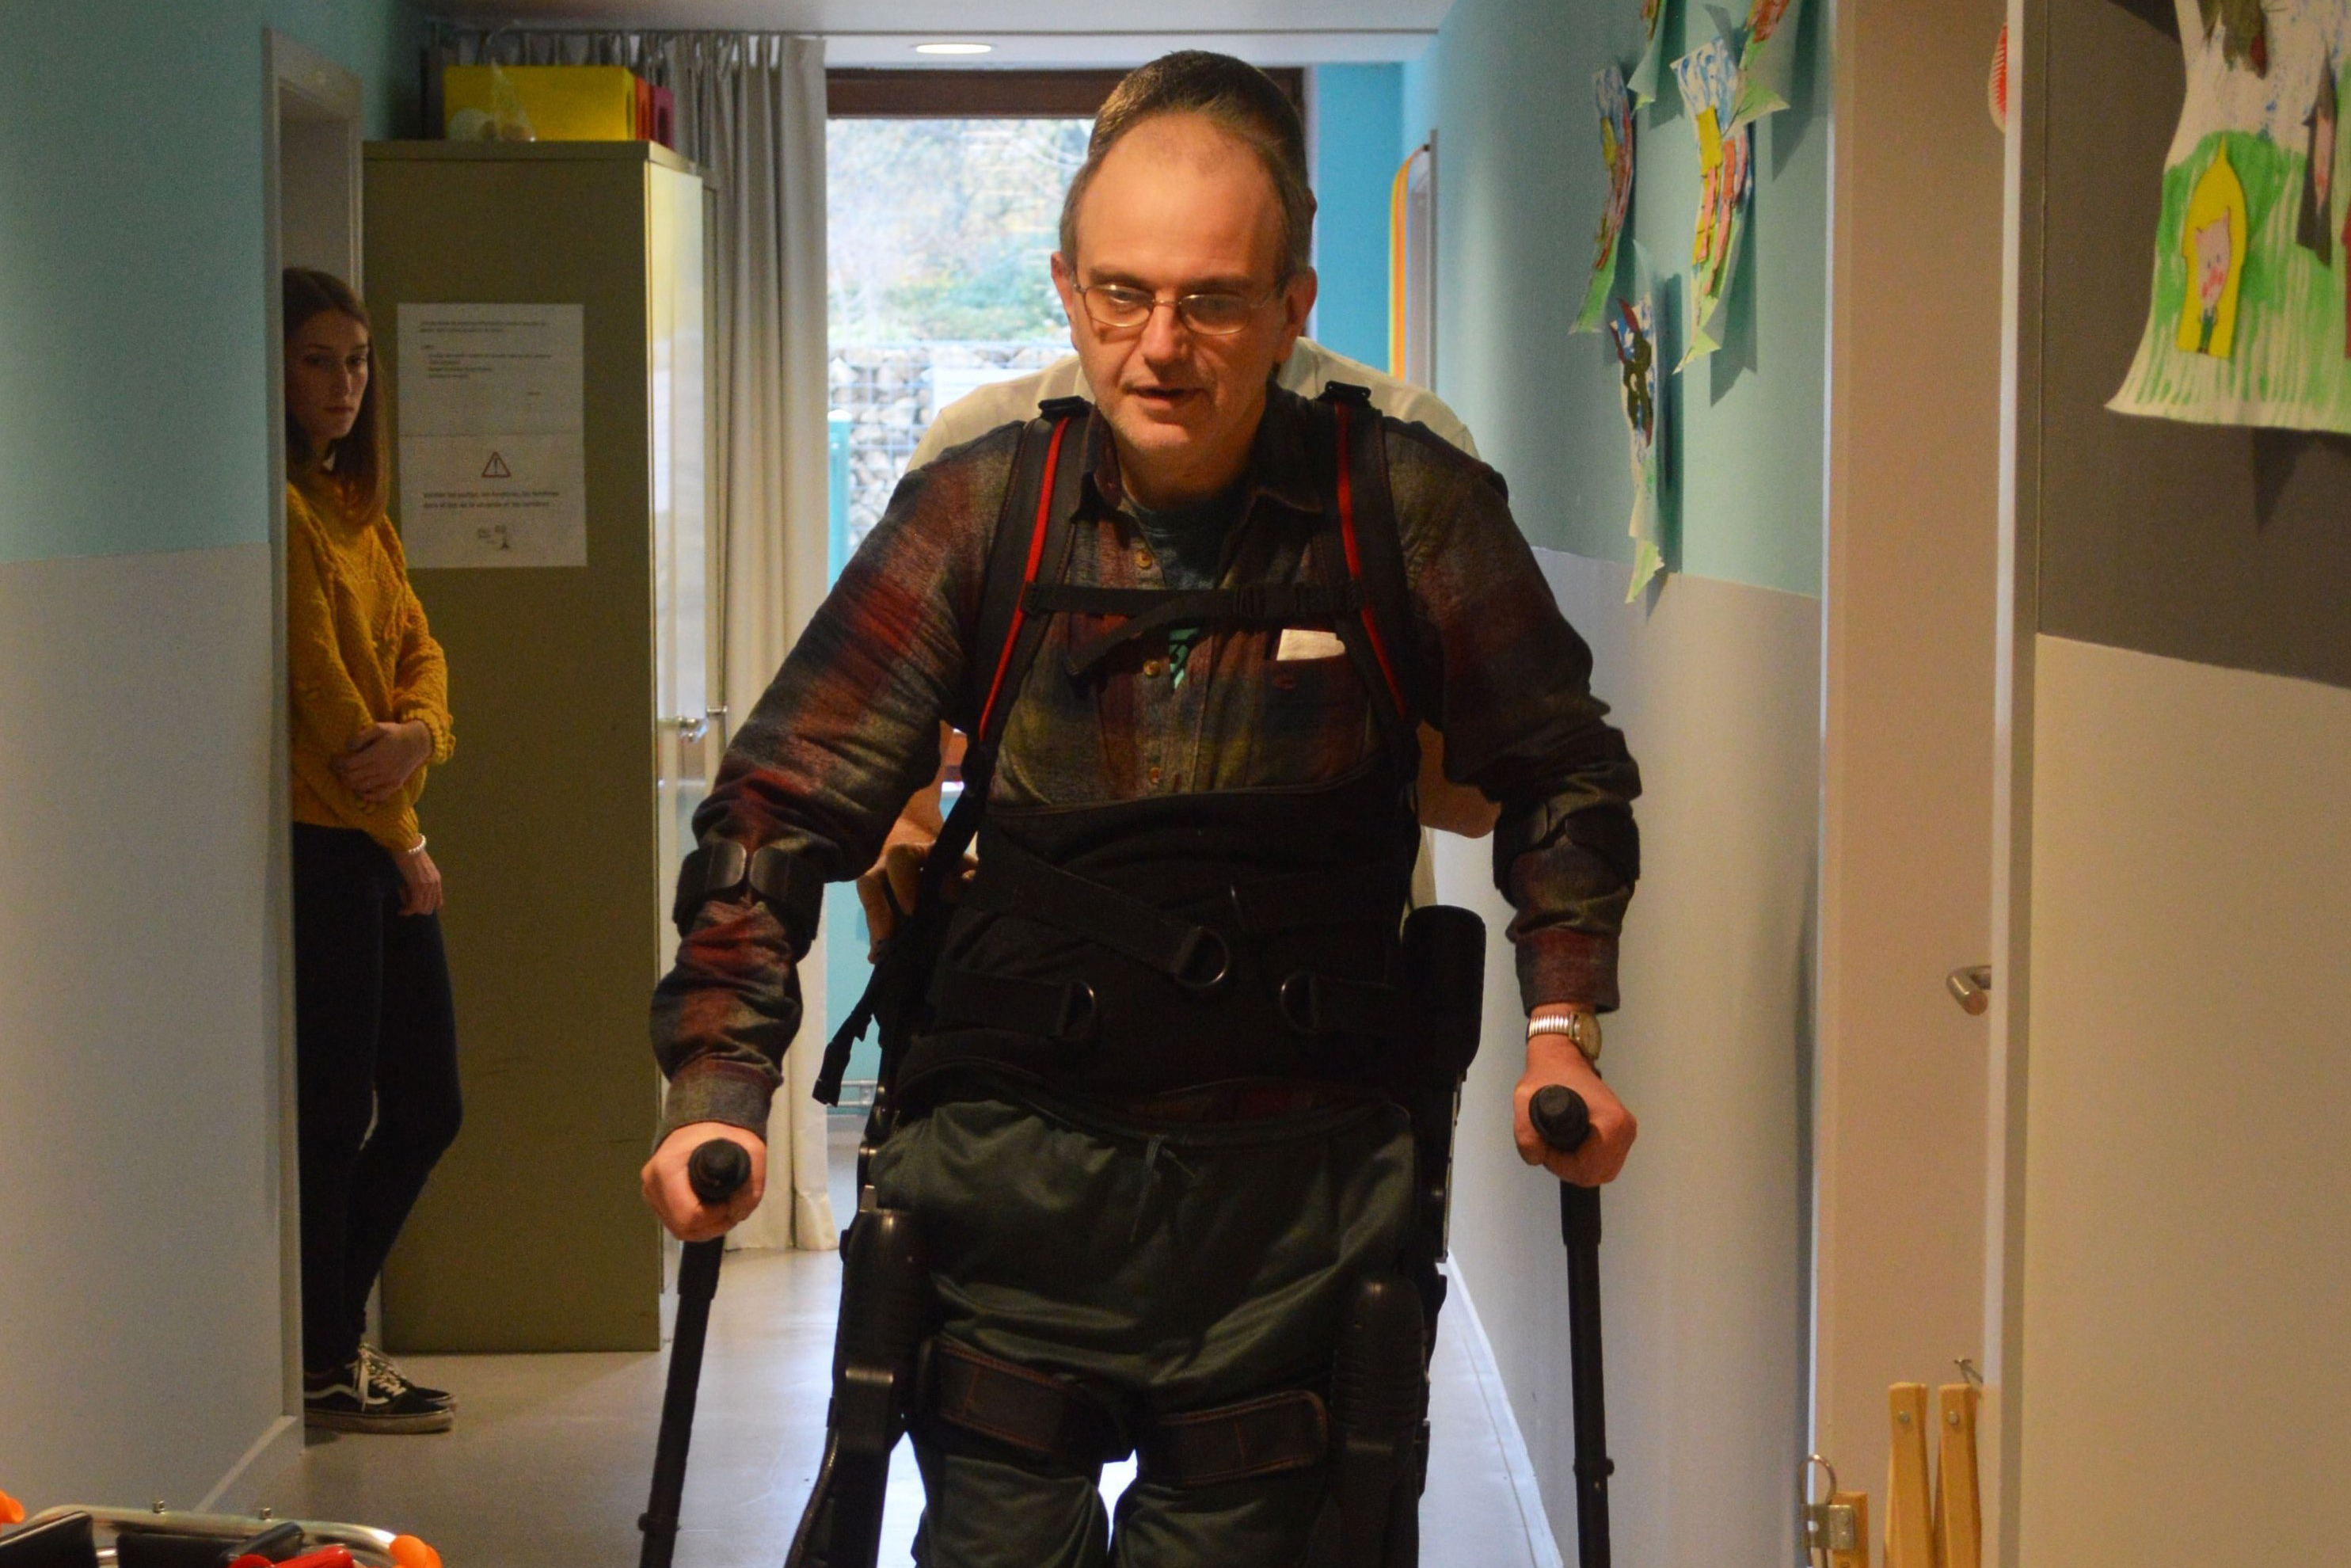 The arrival of a first exoskeleton in a medical facility in Luxembourg